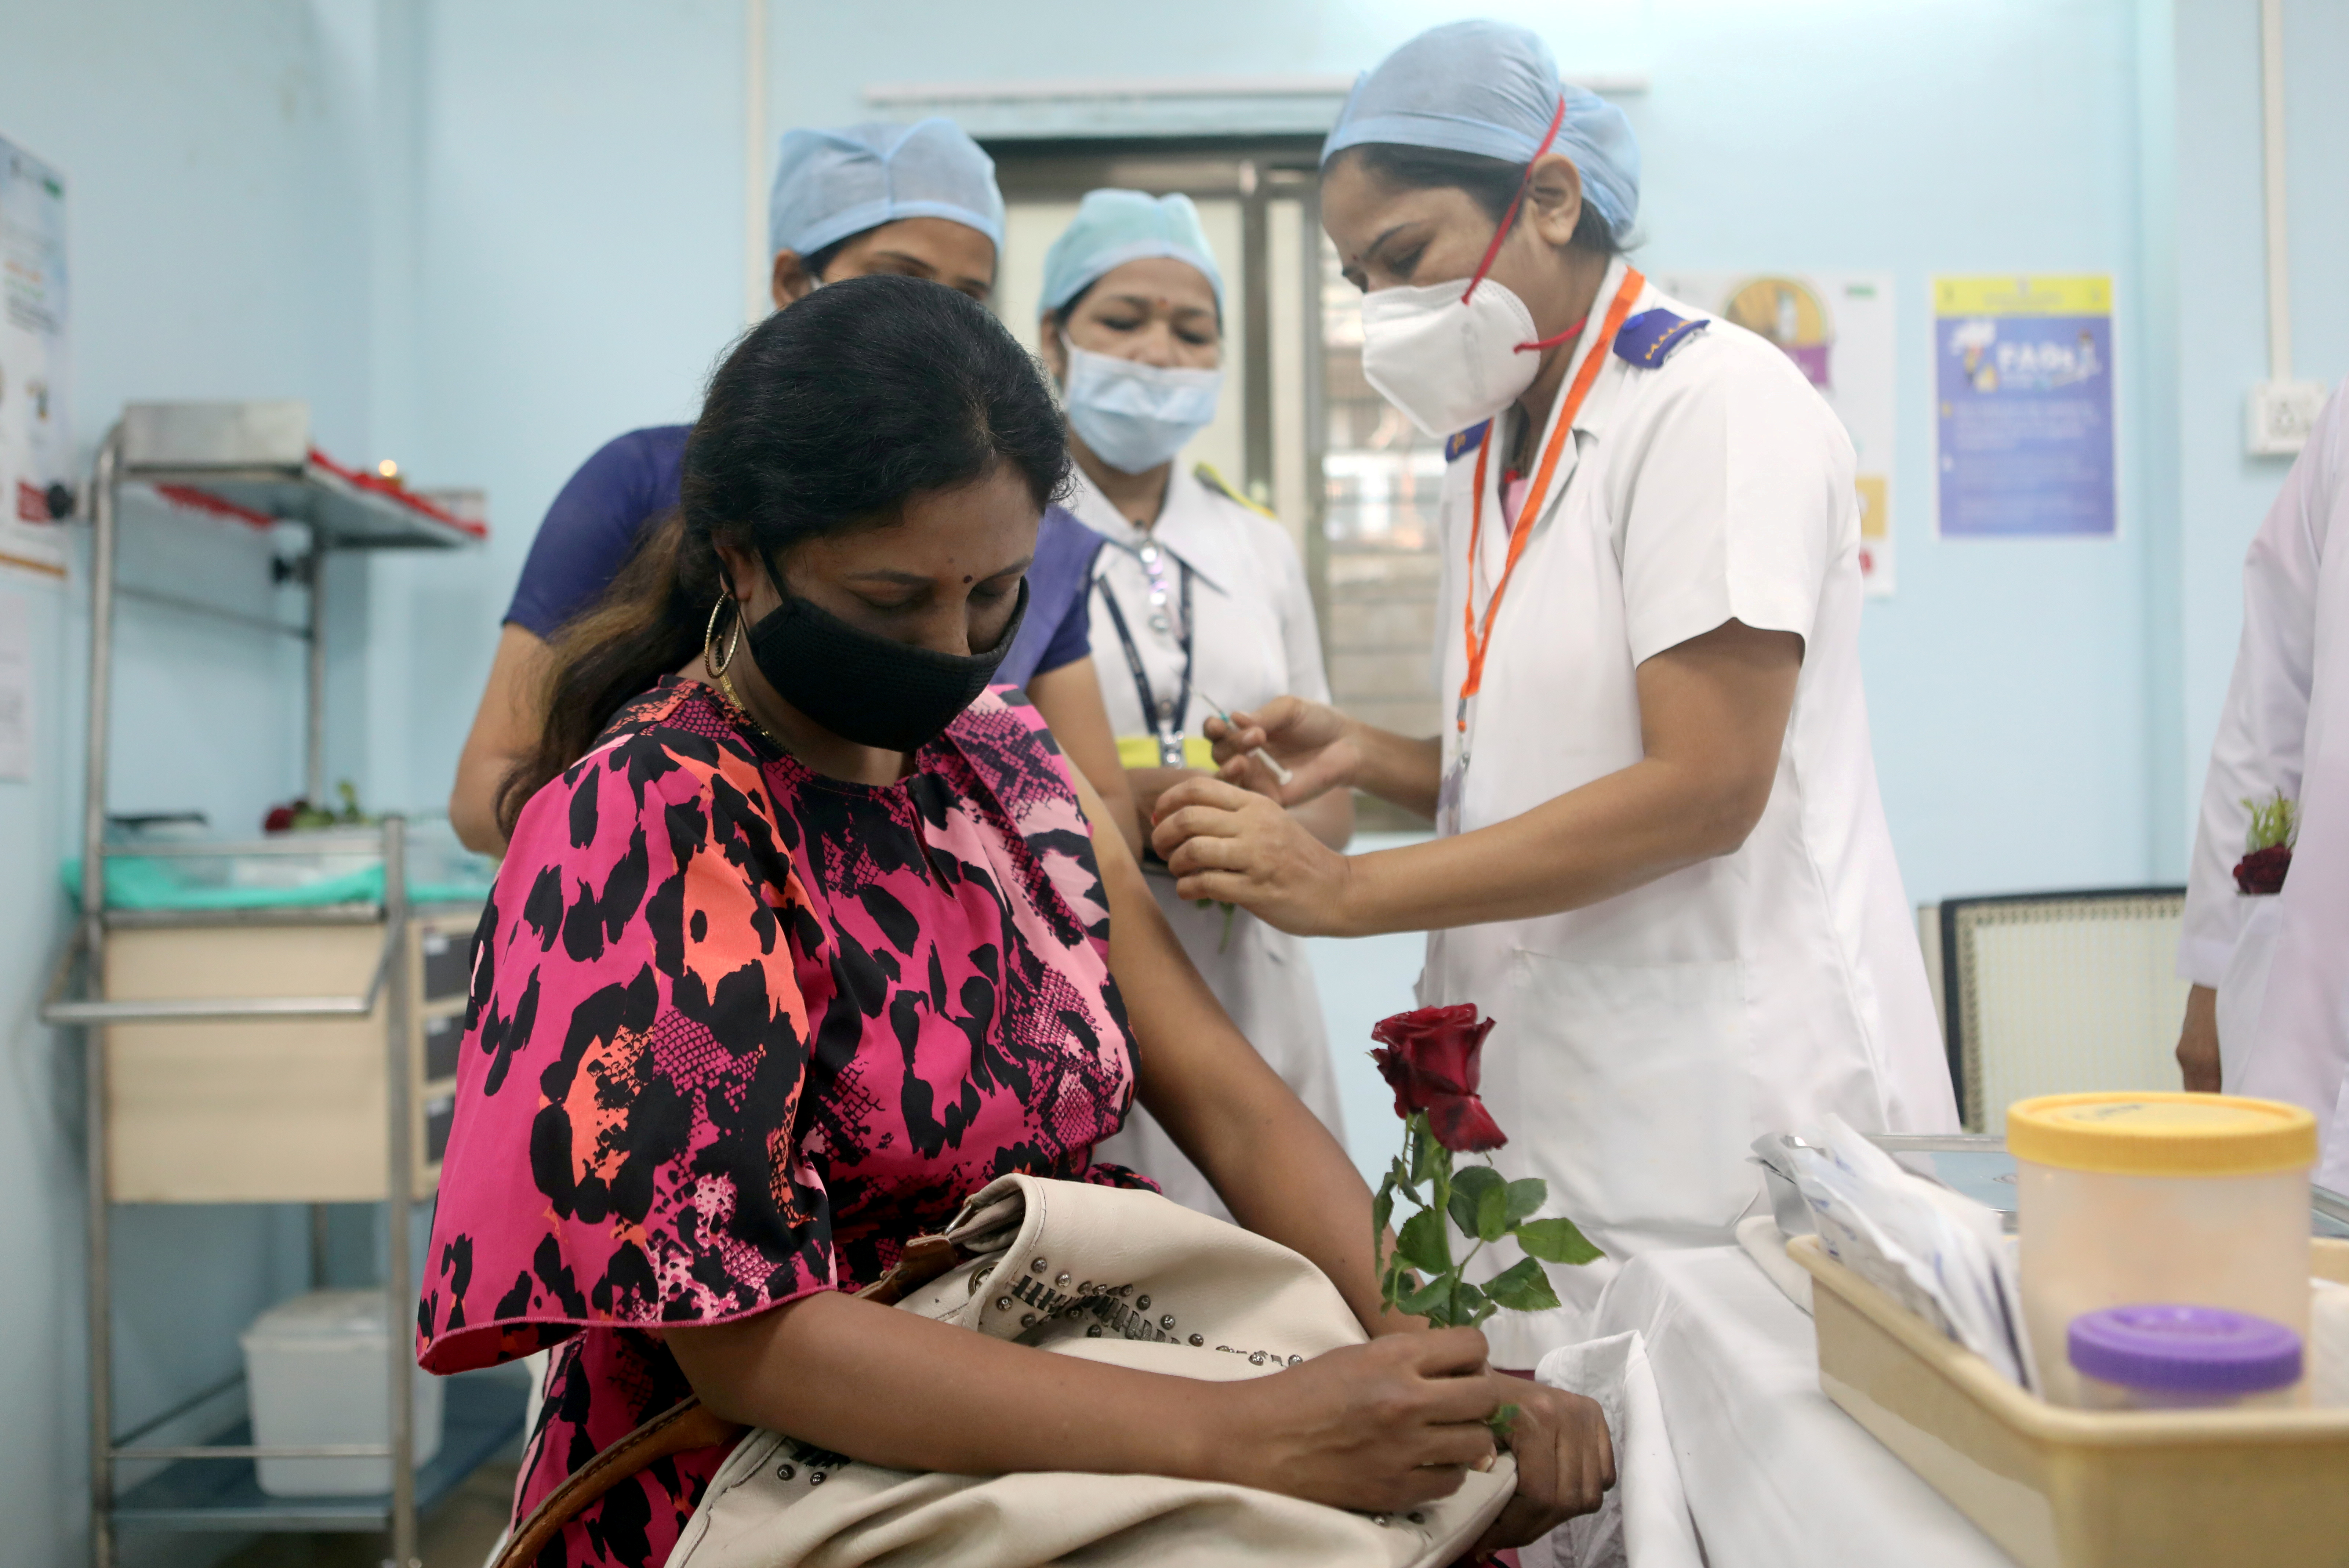 A healthcare worker holding a rose receives an AstraZeneca's COVISHIELD vaccine, during the coronavirus disease (COVID-19) vaccination campaign, at a medical centre in Mumbai, India, January 16, 2021. REUTERS/Francis Mascarenhas/File Photo